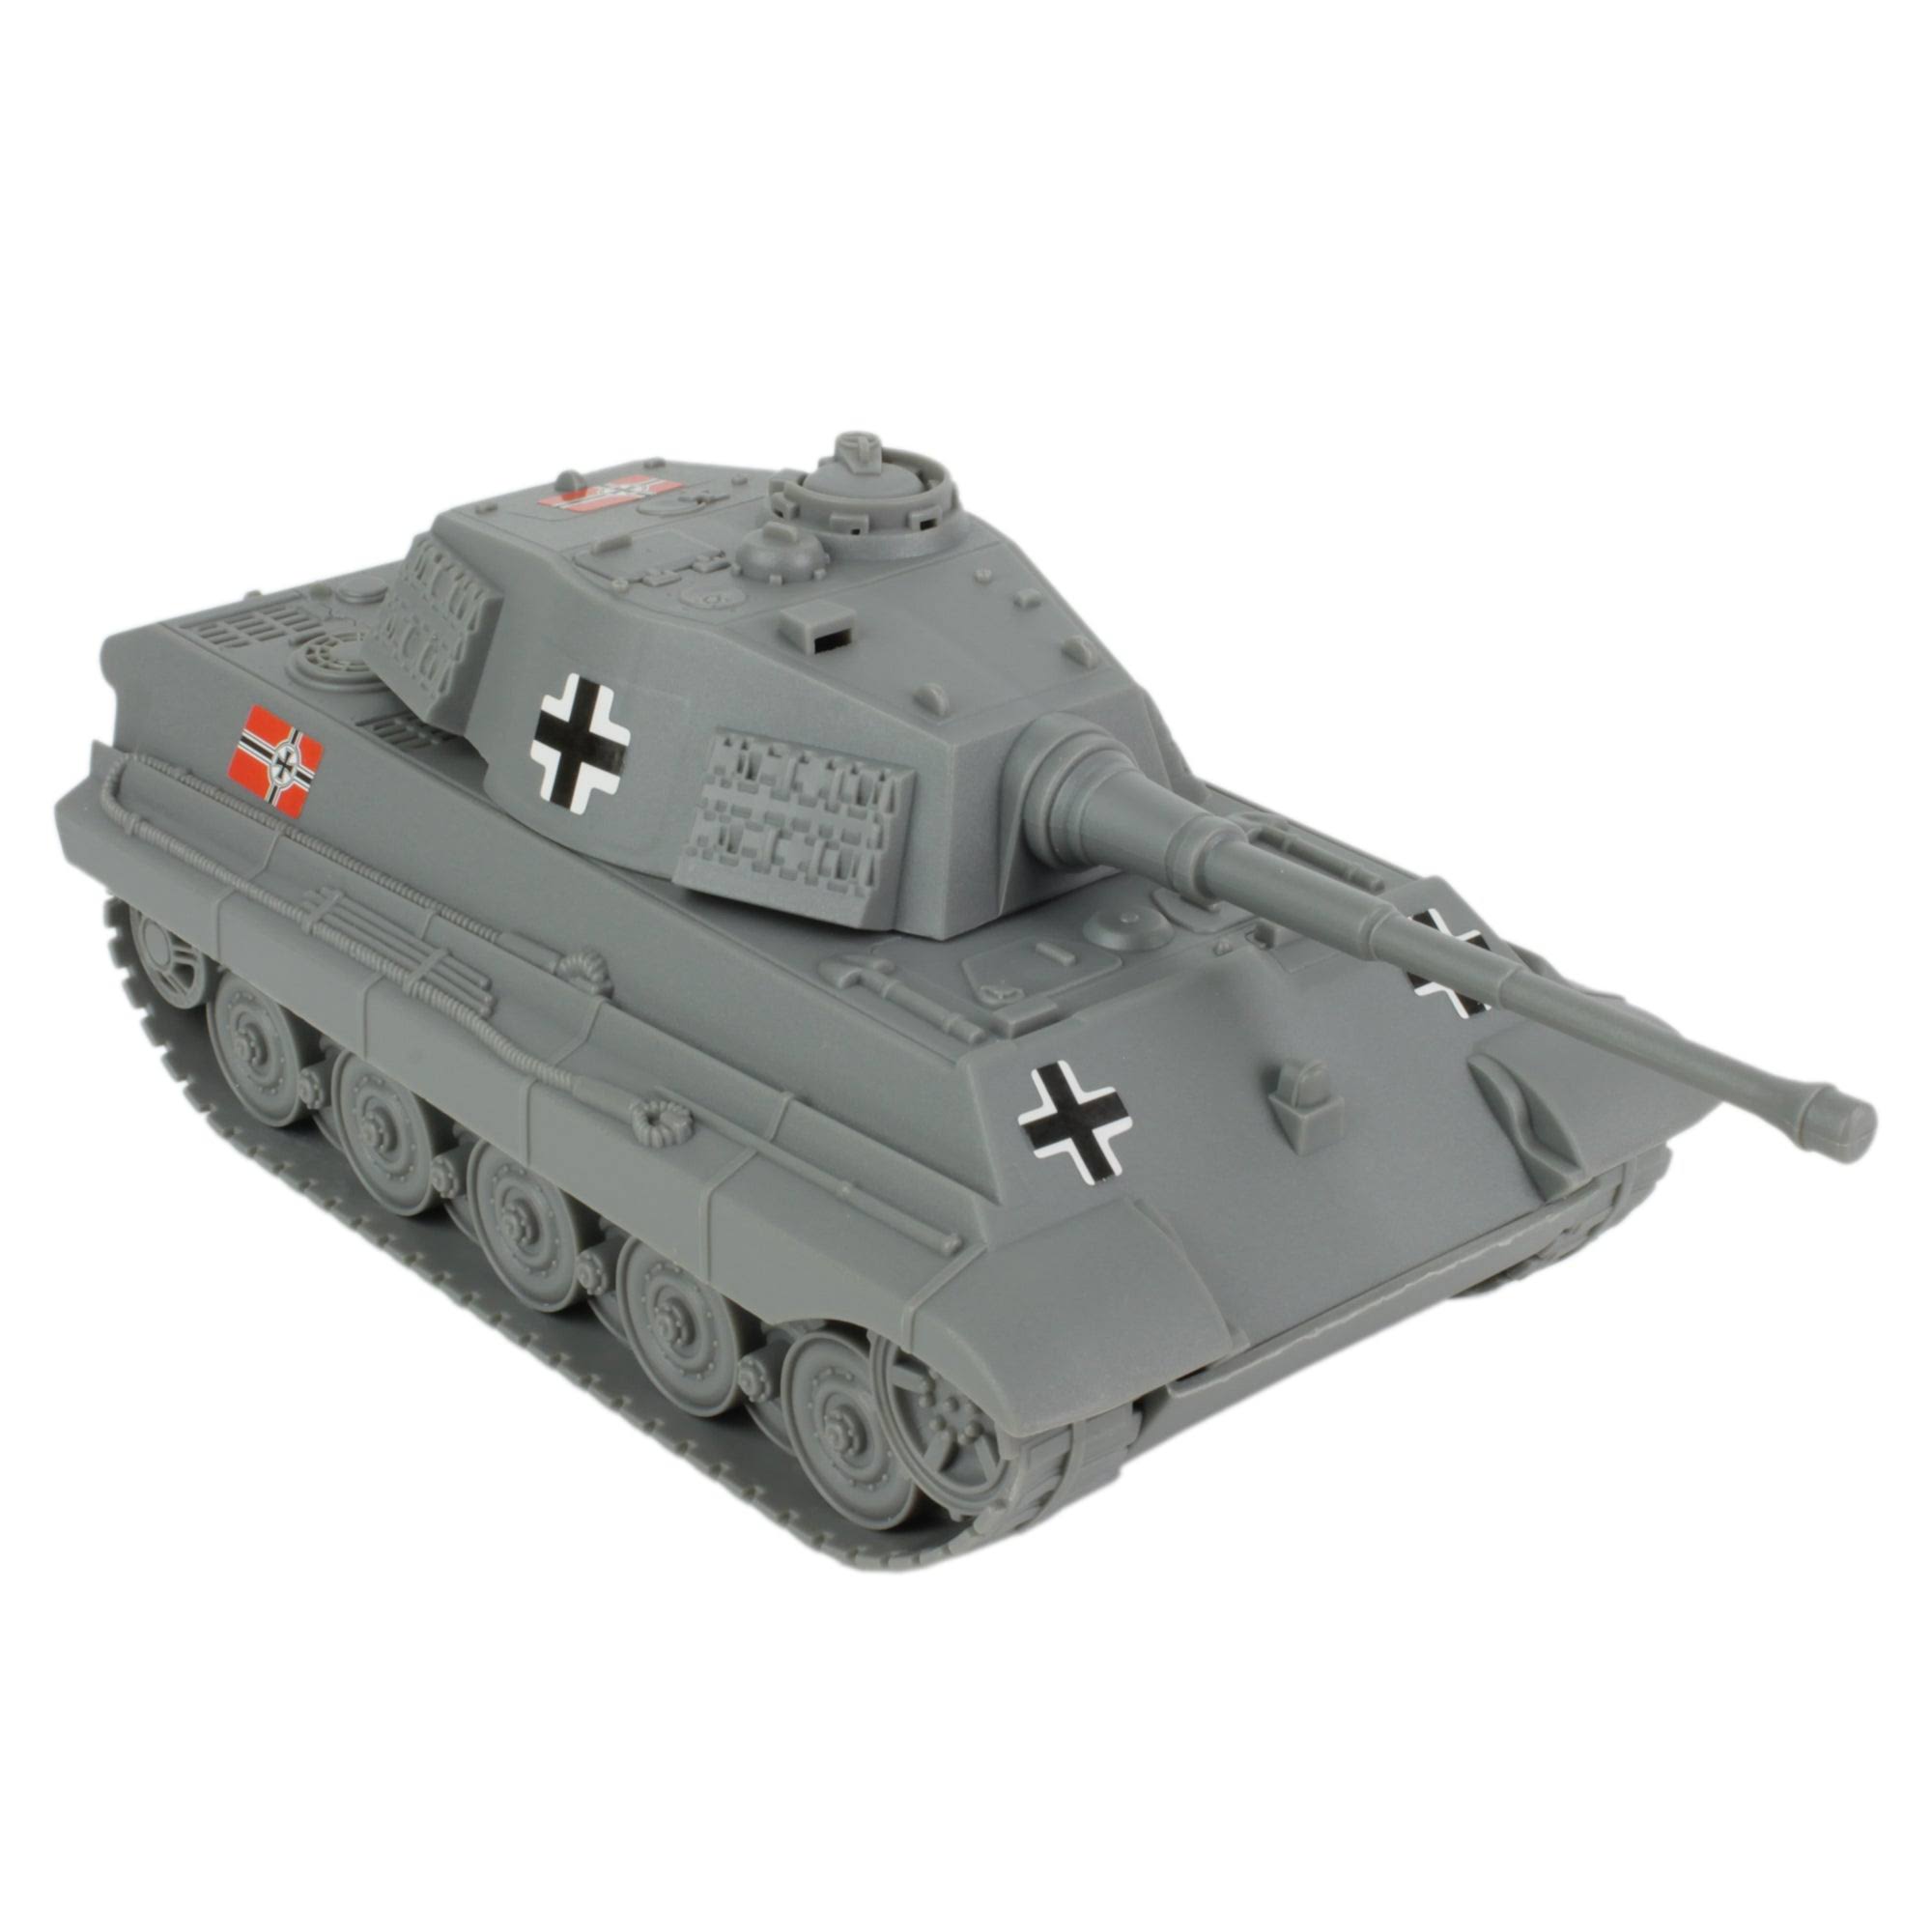 Bmc Toys Bmc Wwii Gray German King Tiger Toy Tank 1:32 Scale For 54mm Army Men Soldier Figures